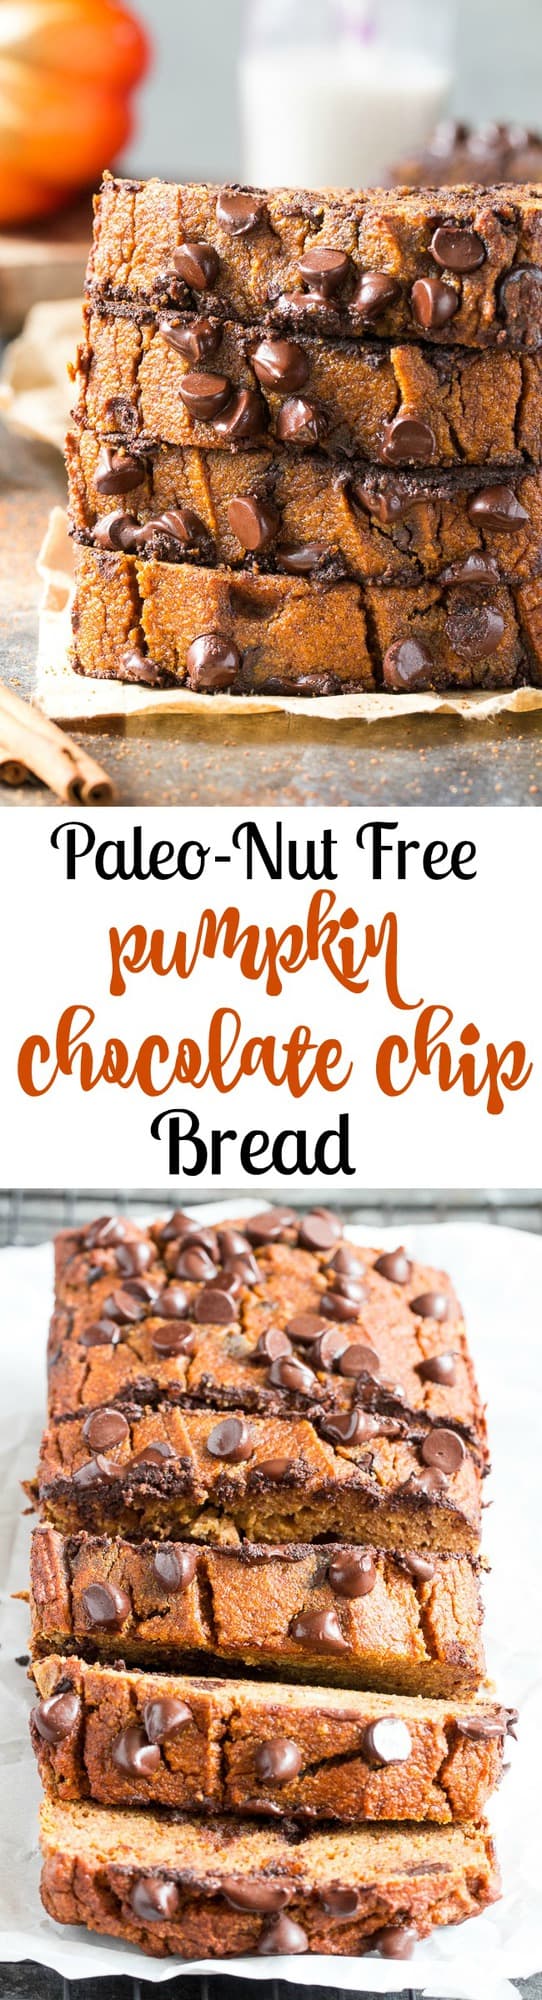 This paleo pumpkin bread is perfectly soft, tender, moist and full of sweet spices and dark chocolate chips.  It's made with coconut flour, grain free, dairy free and nut free.  Kid approved too and great for after school snacks and even breakfast!